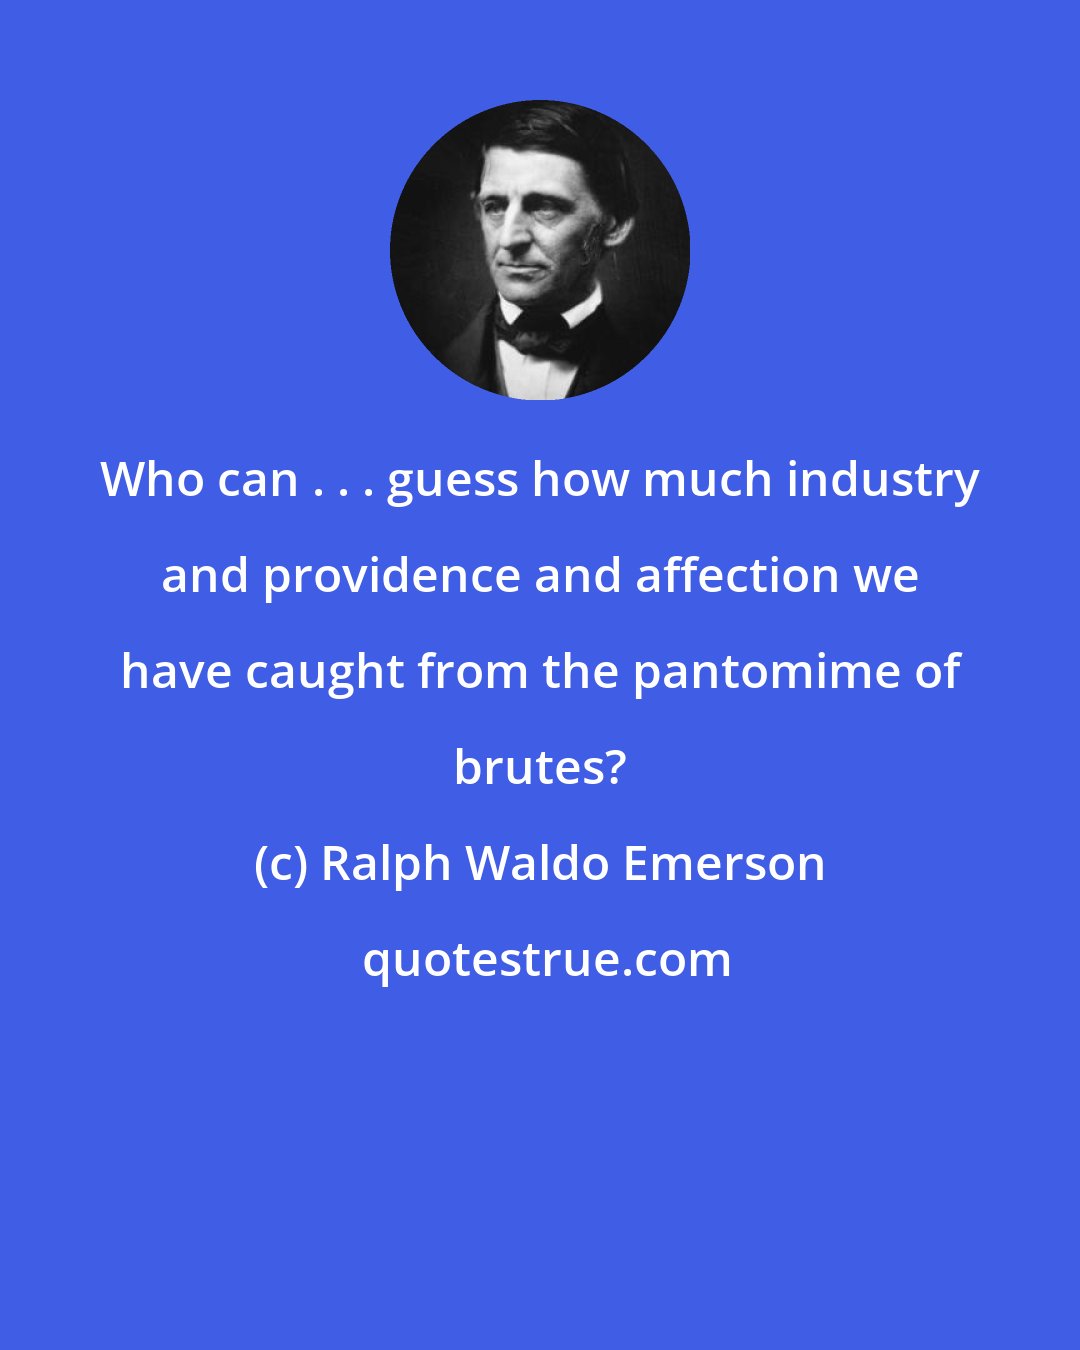 Ralph Waldo Emerson: Who can . . . guess how much industry and providence and affection we have caught from the pantomime of brutes?